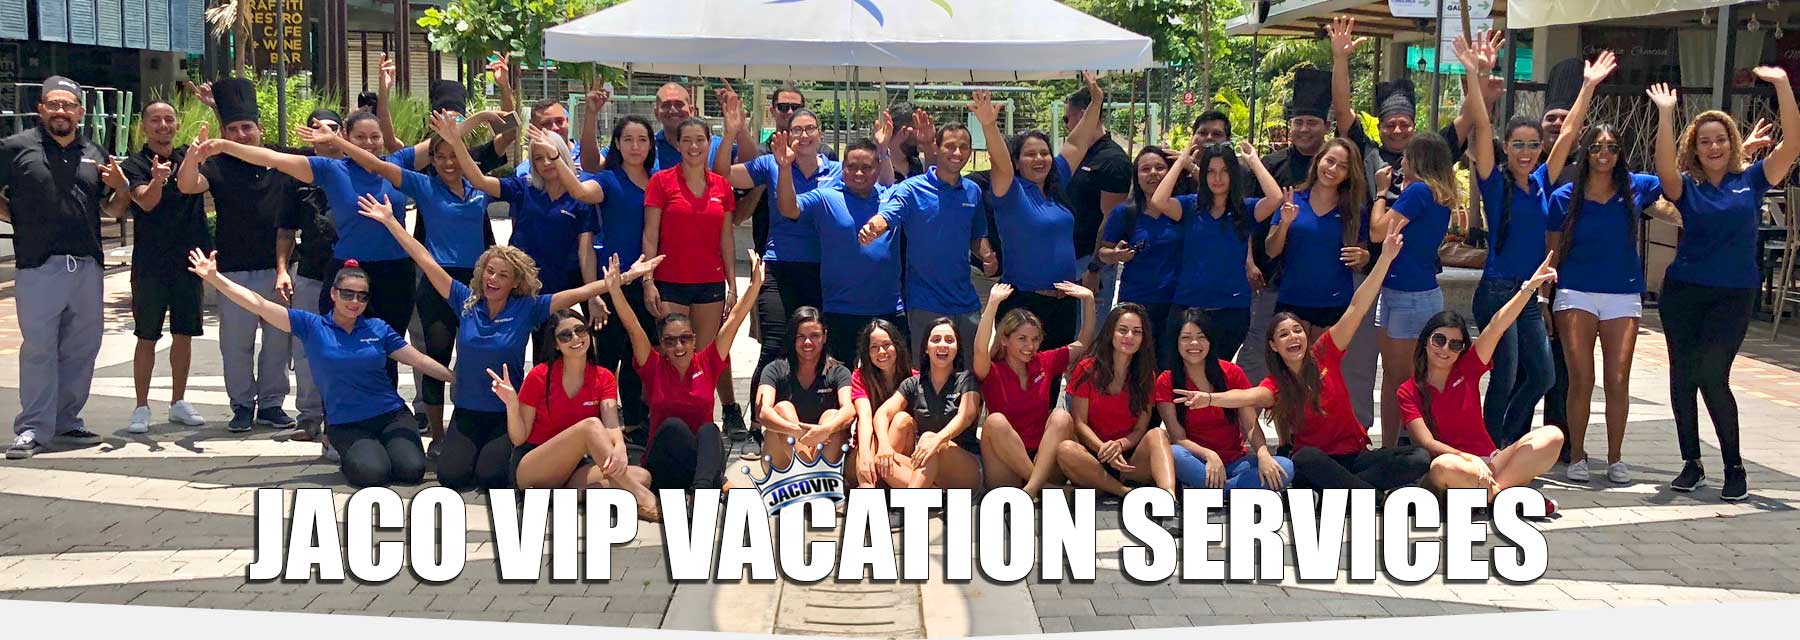 Jaco VIP Vacation Services Staff for All Inclusive Packages in Costa Rica